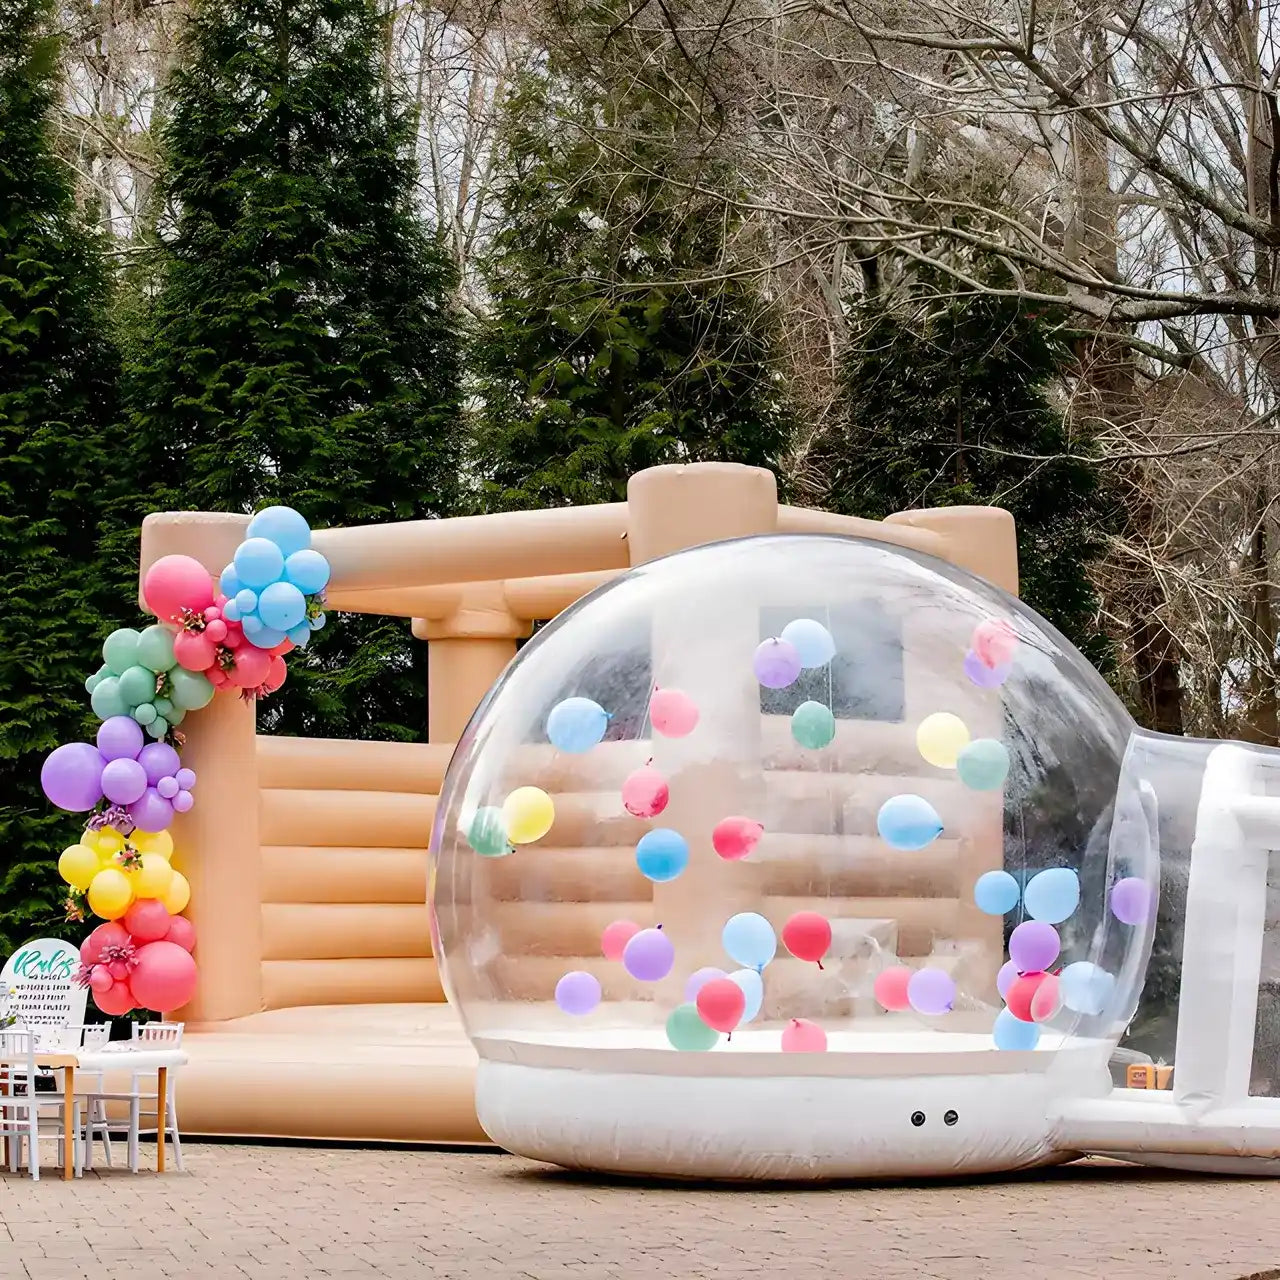 Perfect match between the bounce bubble house and pastel peach colored bouncy castle